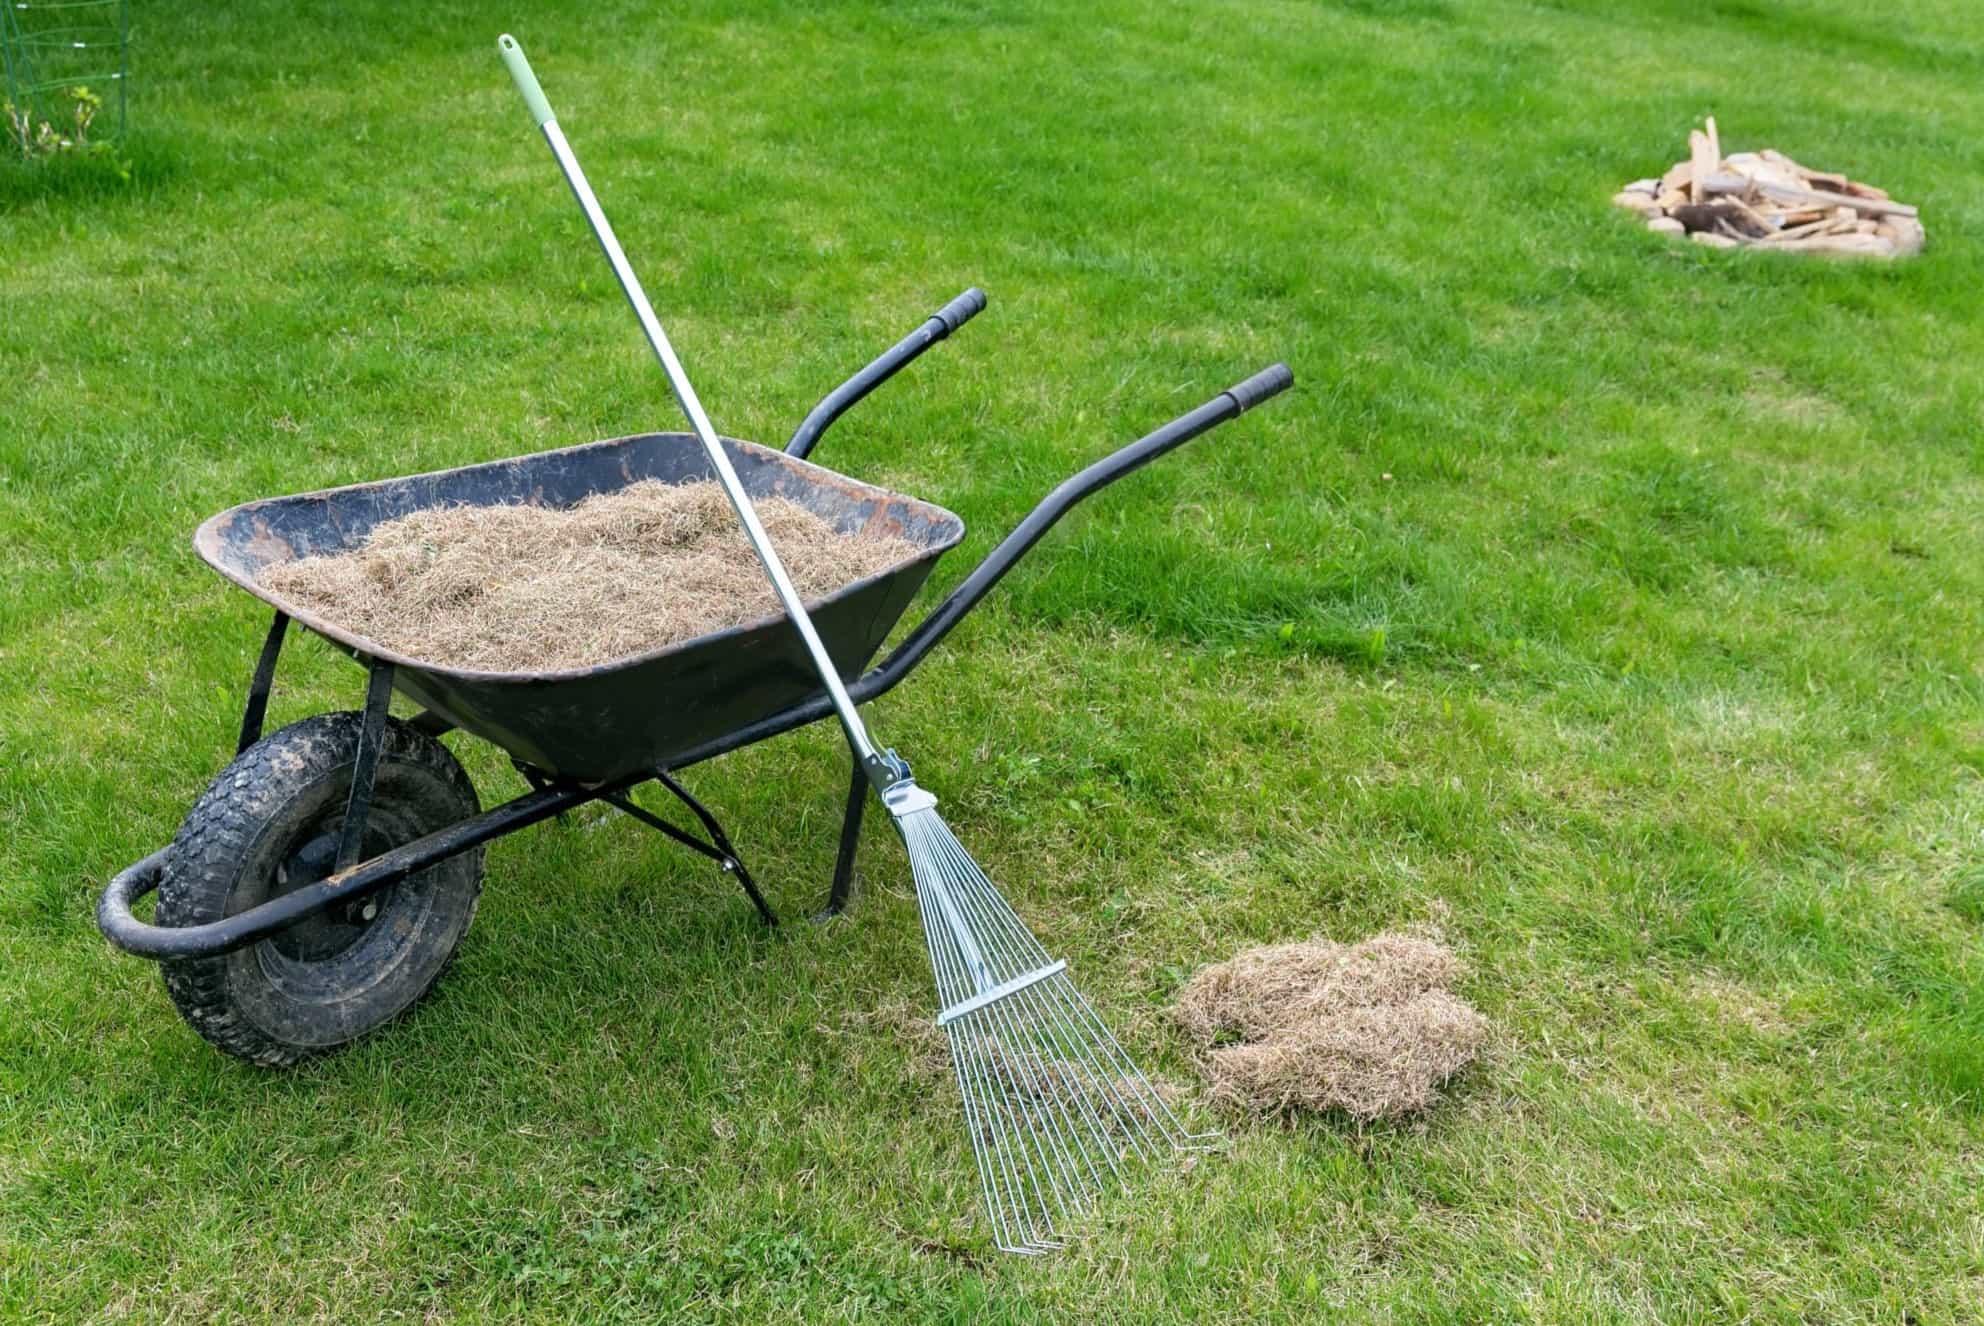 How To Dethatch Grass